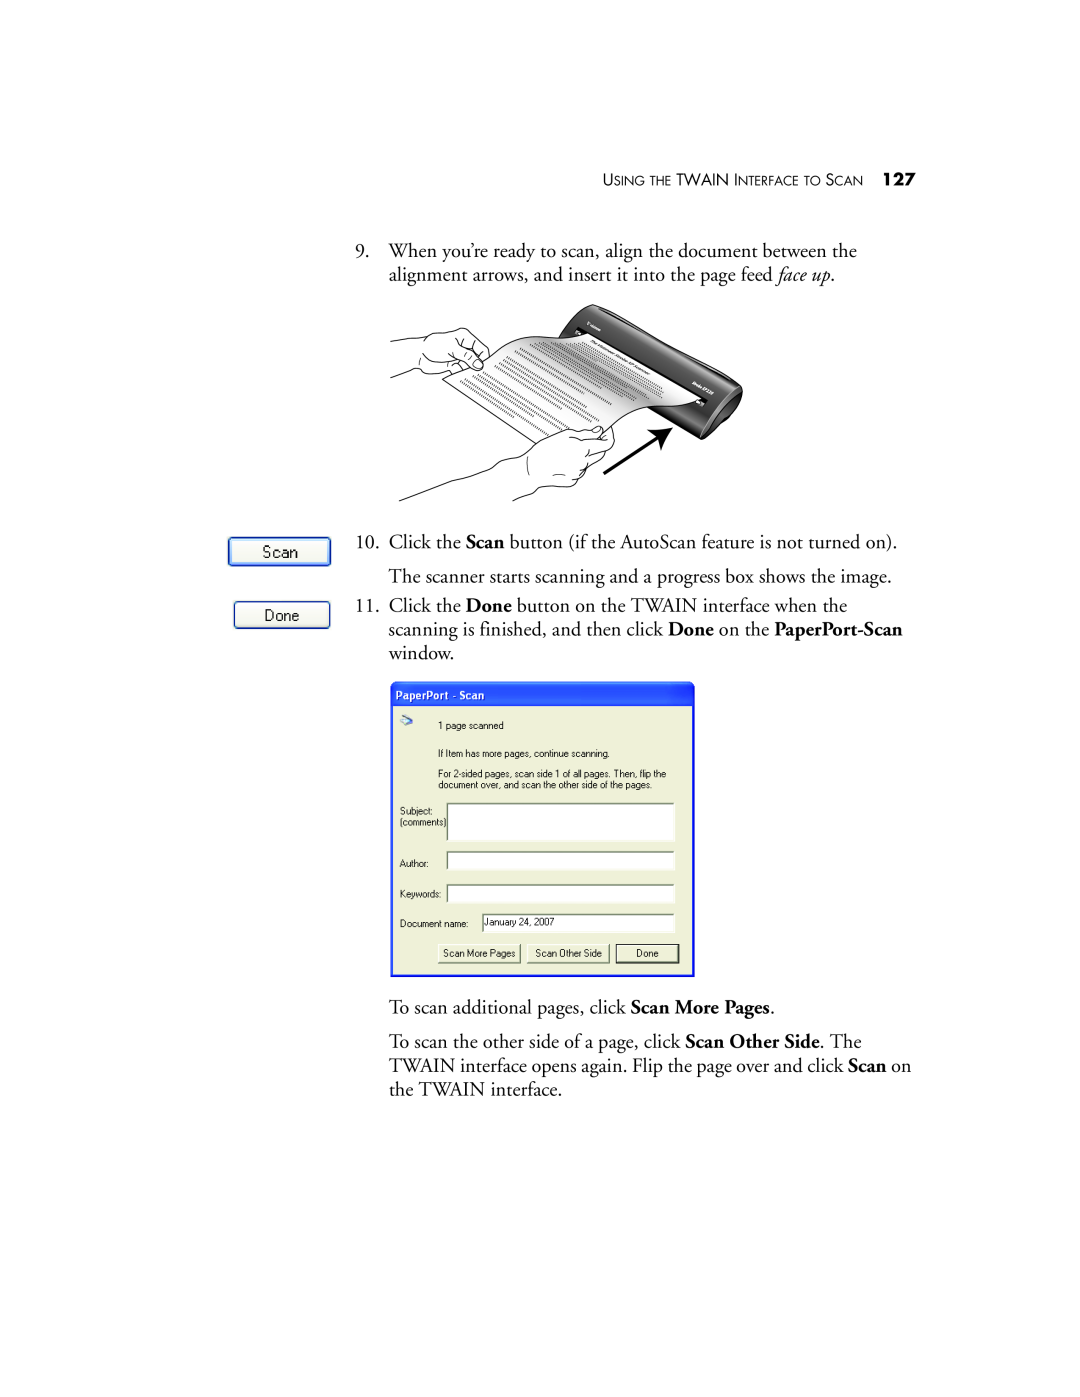 Visioneer XP220 manual To scan additional pages, click Scan More Pages 